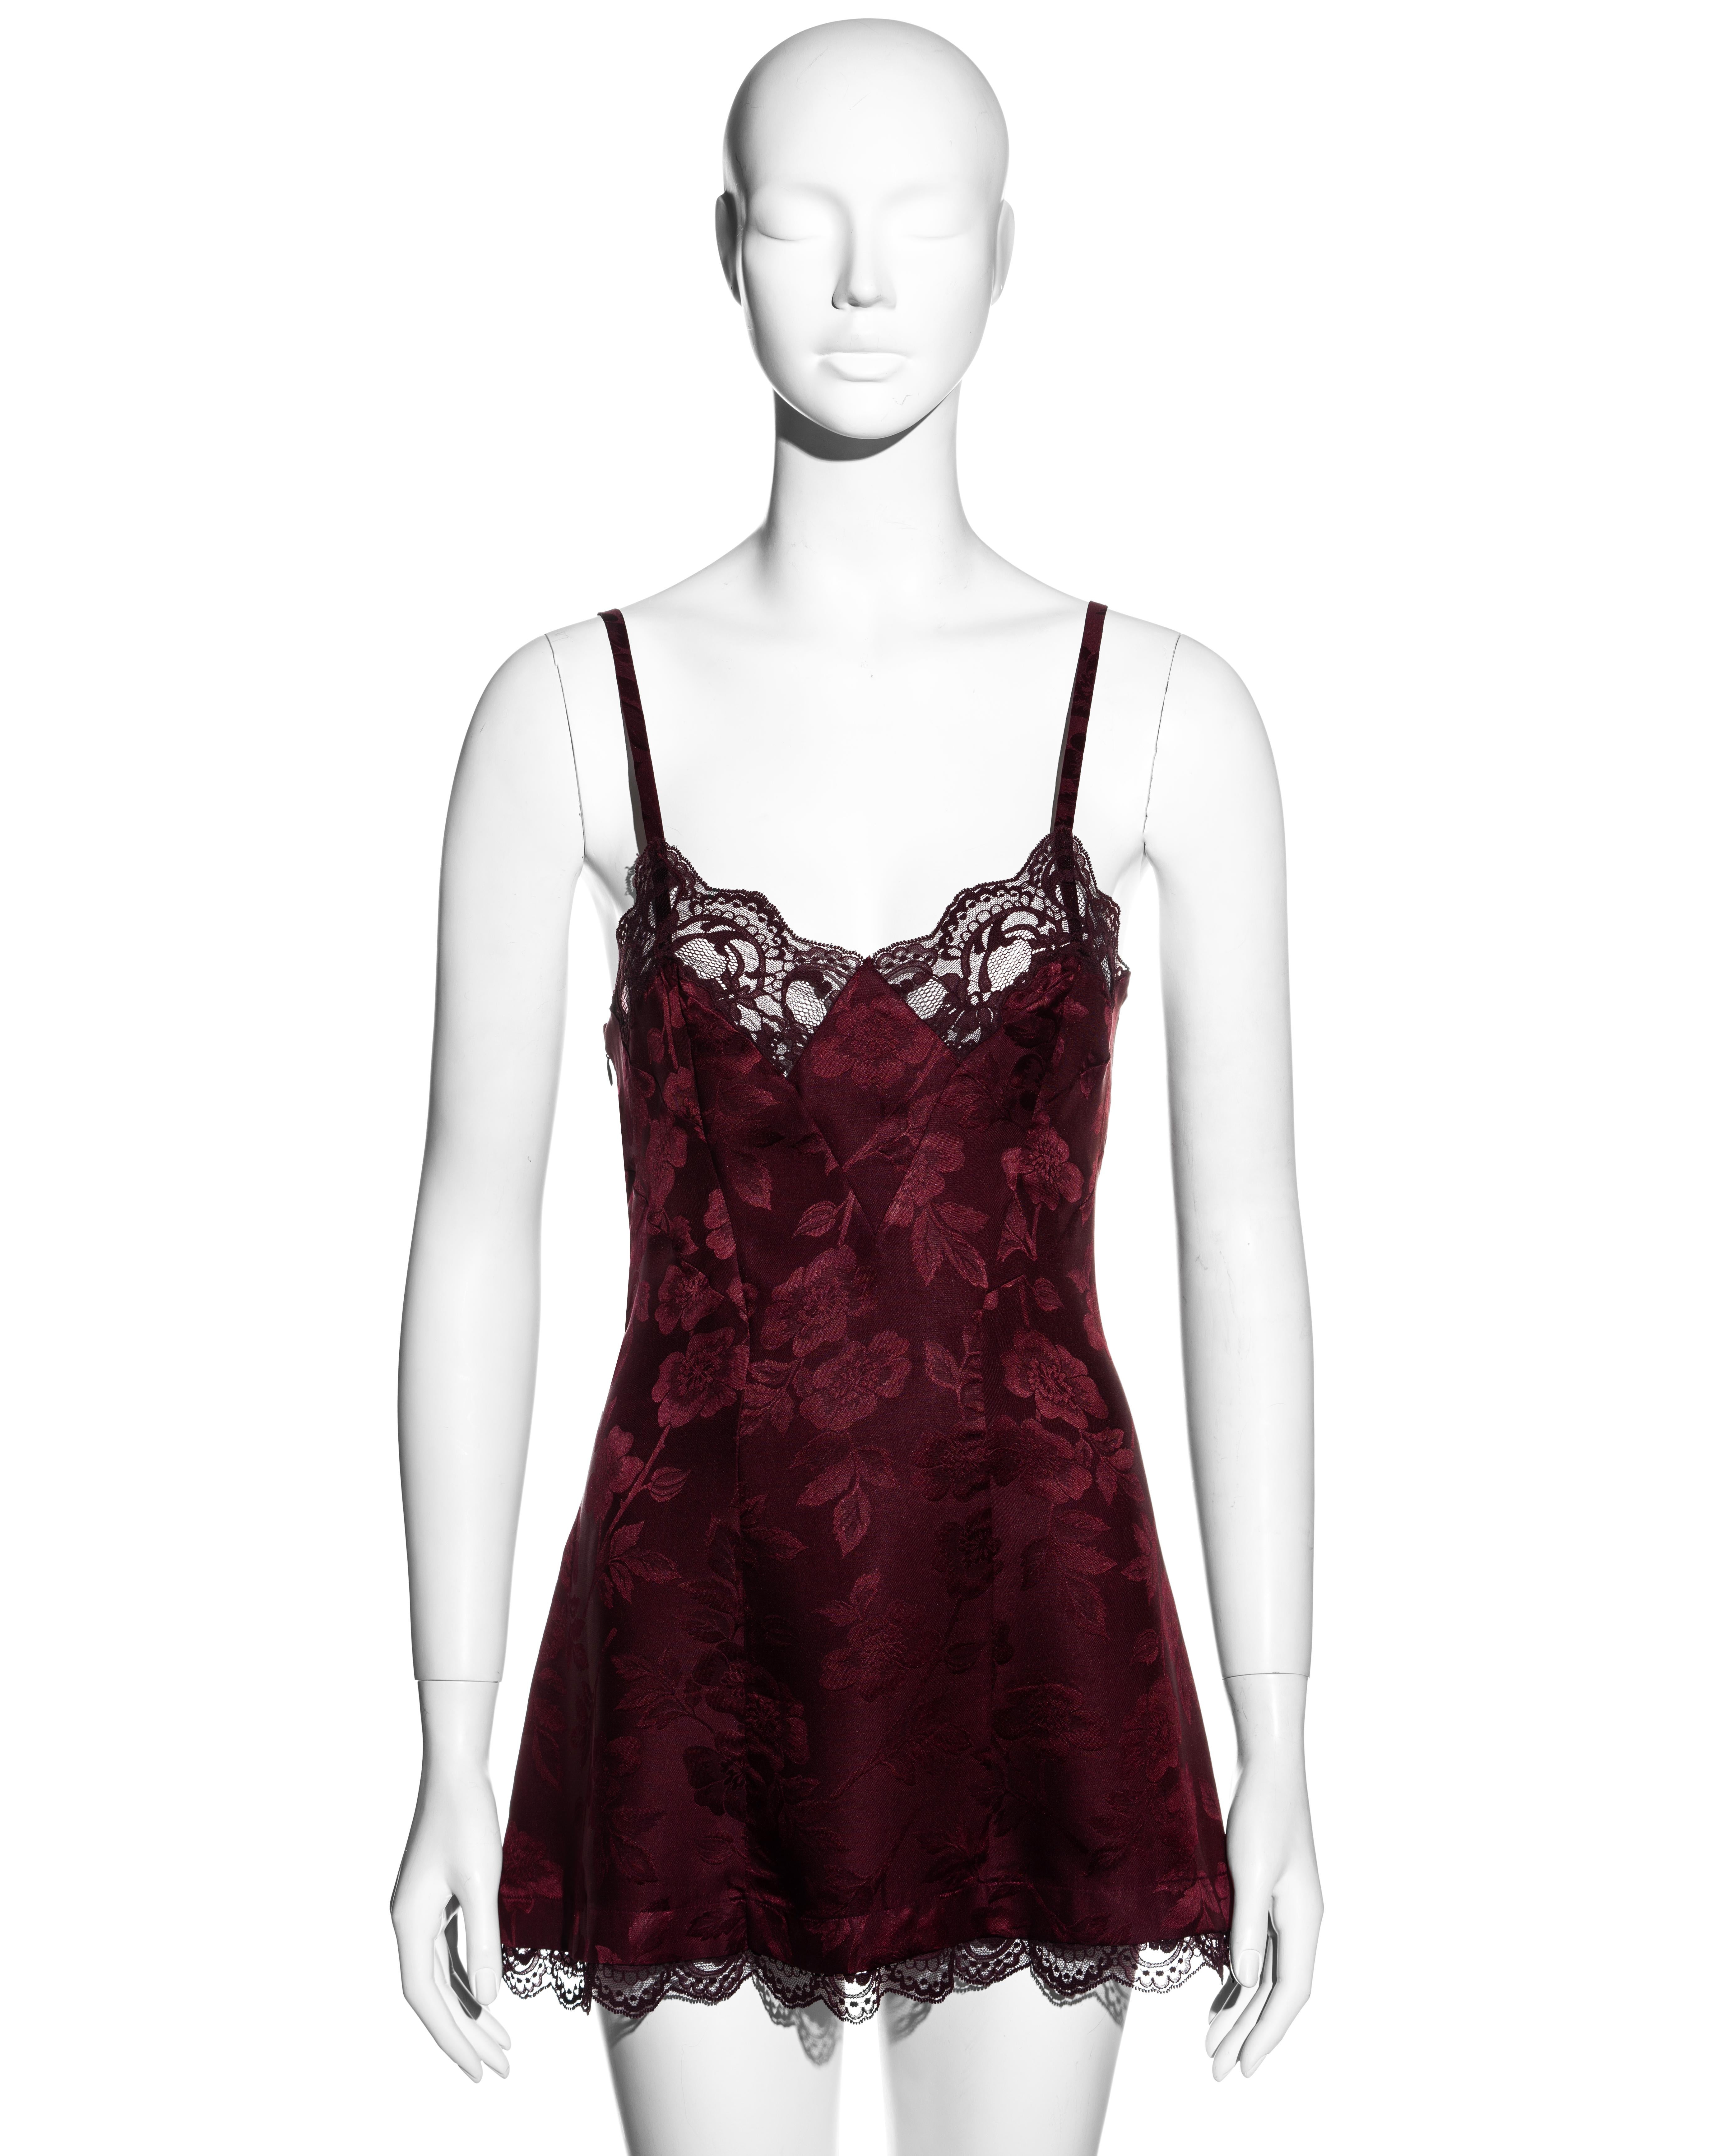 ▪ Christian Dior micro mini slip dress
▪ Designed by John Galliano
▪ Floral silk jacquard 
▪ Lace trim 
▪ A-line 
▪ Can be worn as a micro mini dress or long evening top
▪ FR 36 - UK 8 - US 4
▪ Fall-Winter 2005
▪ 100% Silk 
▪ Made in France